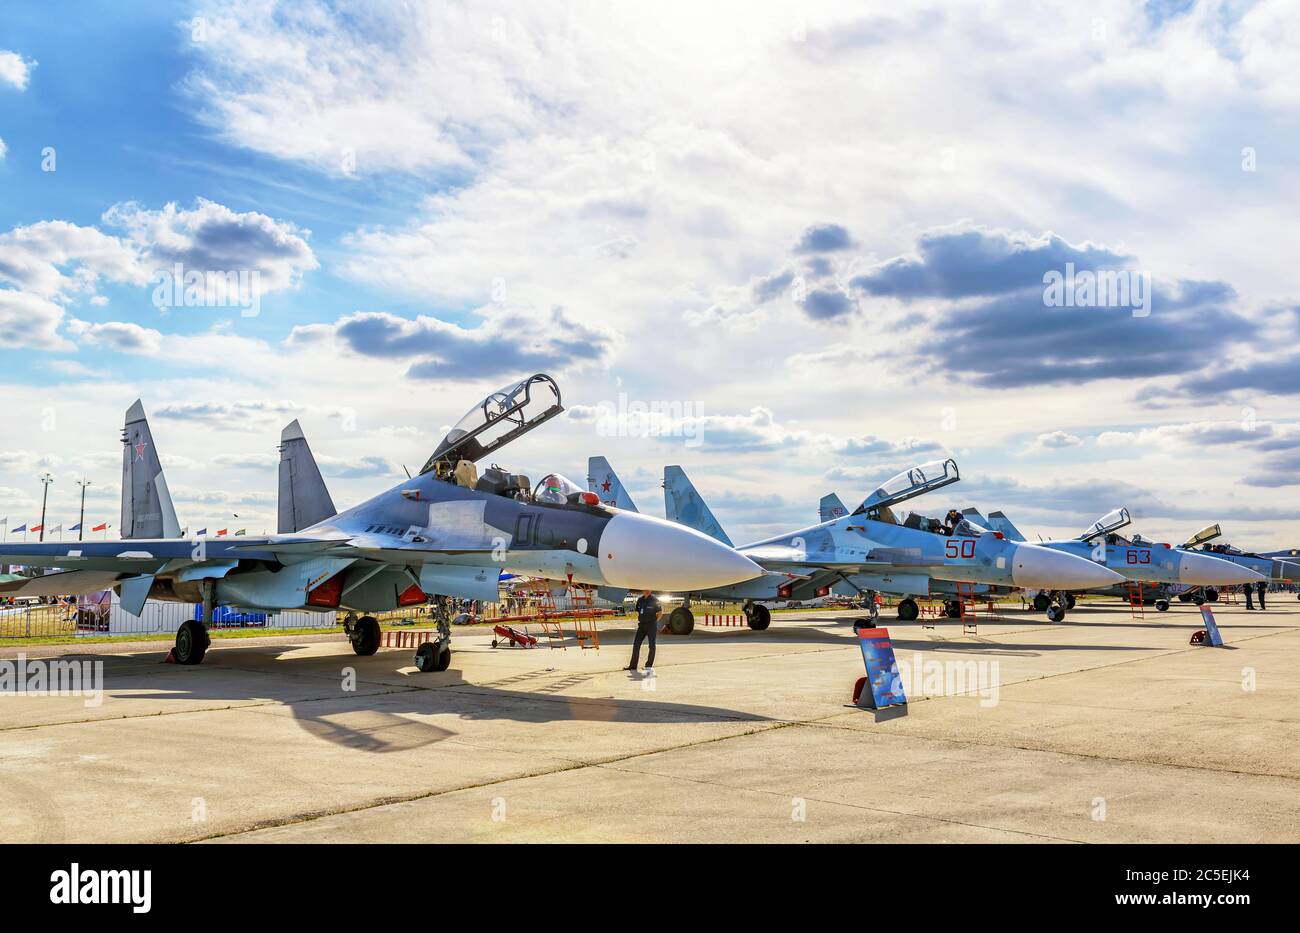 MOSCOW REGION - AUGUST 28, 2015: Russian strike fighters Sukhoi su-30 and su-34 at the International Aviation and Space Salon (MAKS) in Zhukovsky. Stock Photo